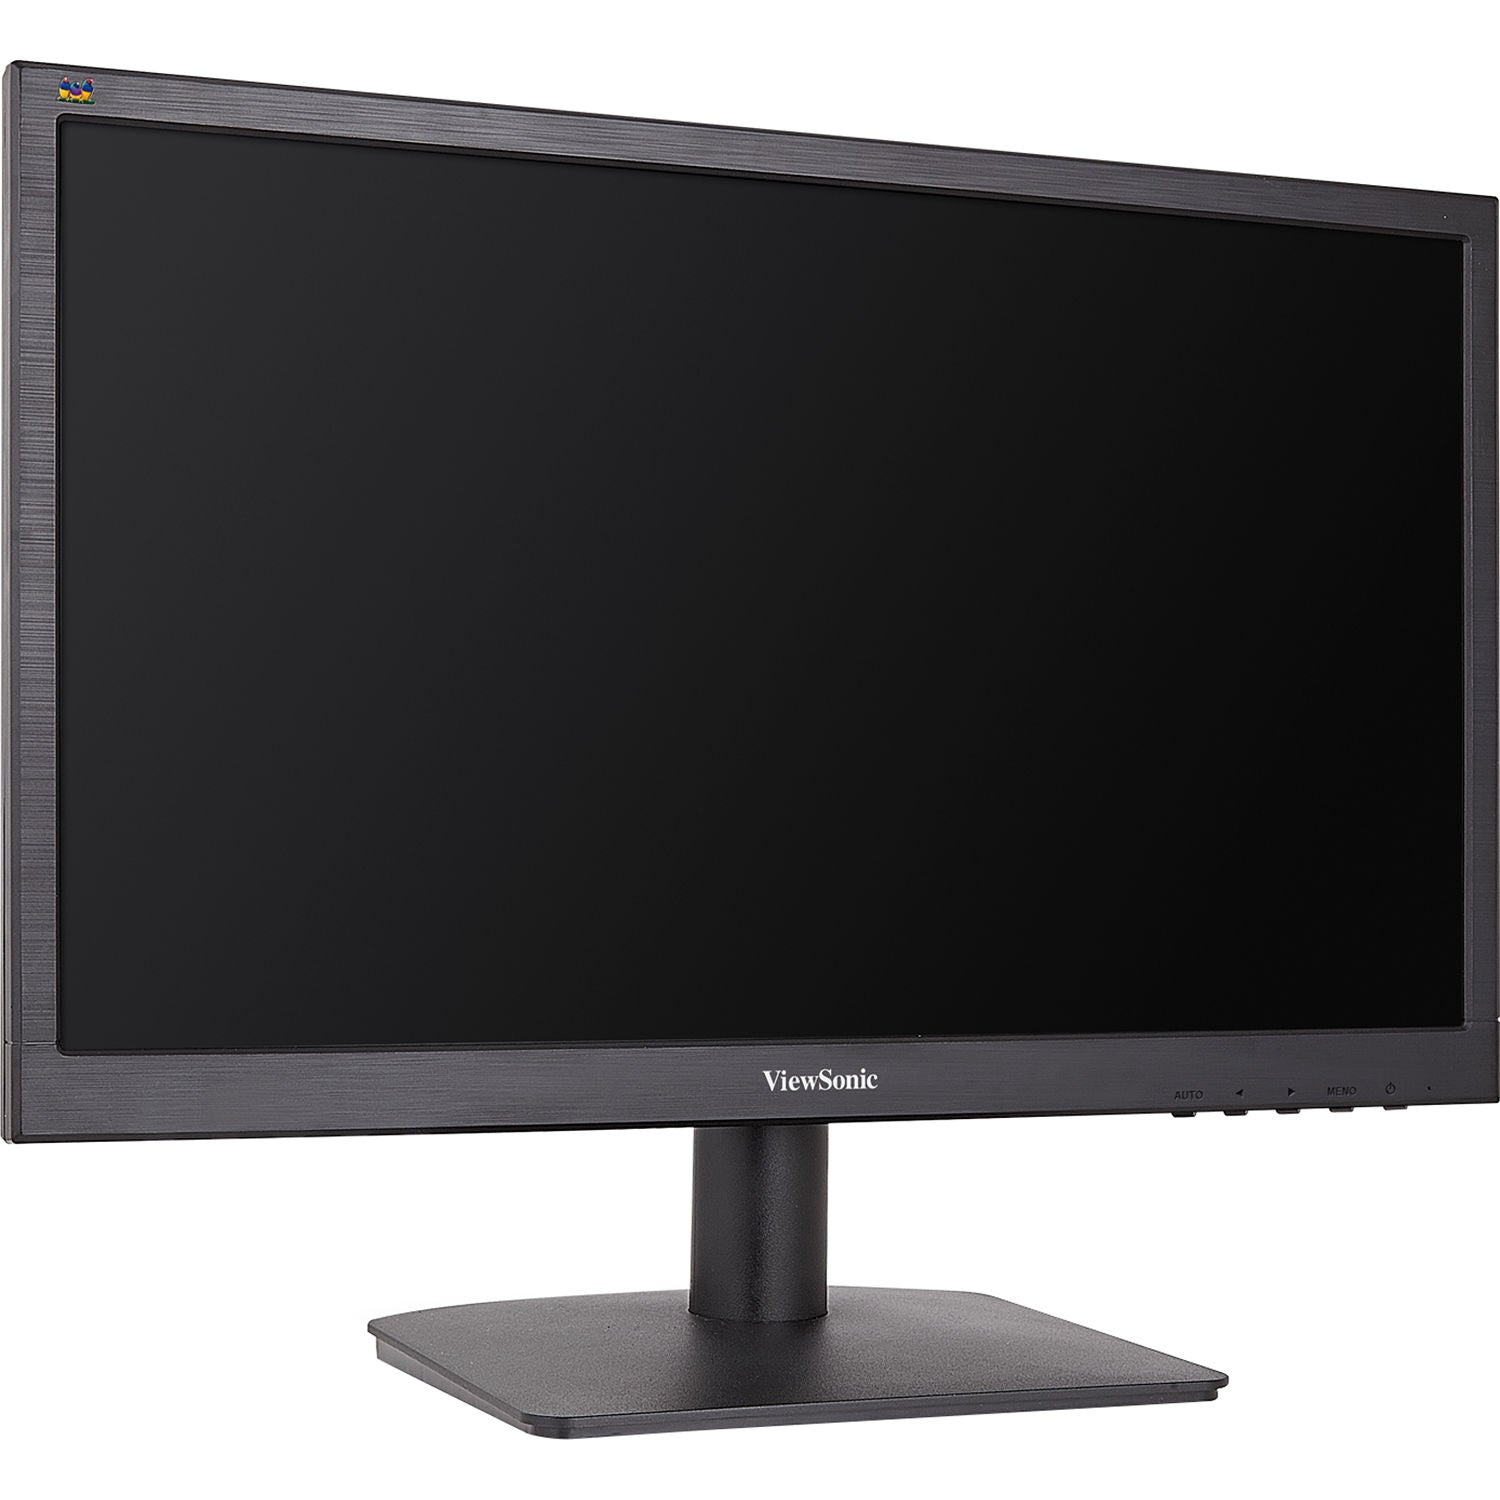 ViewSonic VA1903A-S 19" 1366x768 Home and Office Monitor - Certified Refurbished